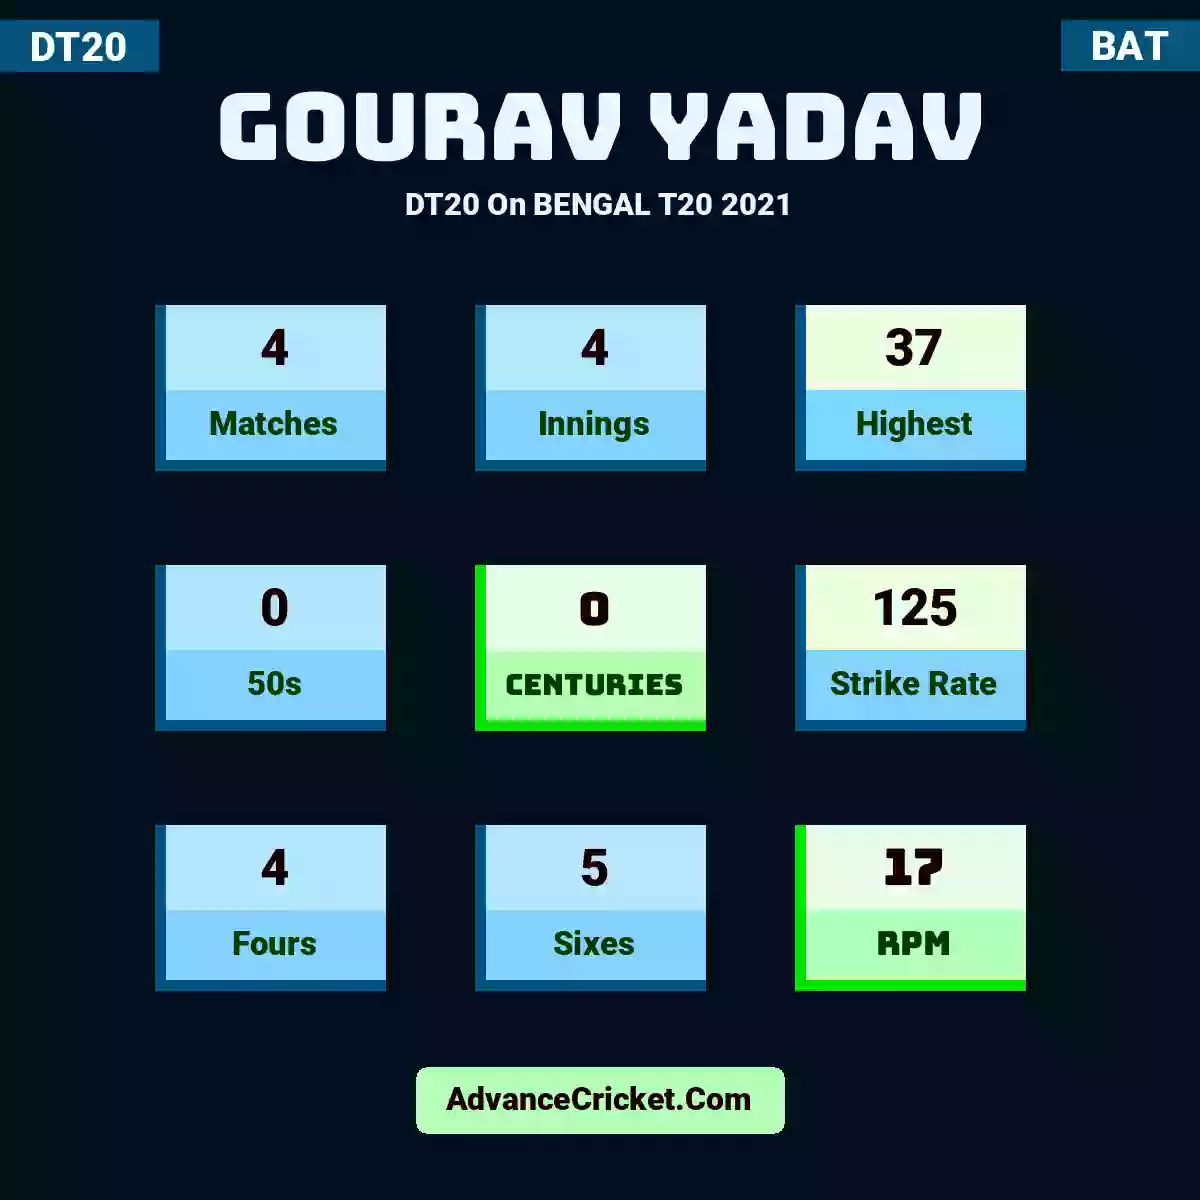 Gourav Yadav DT20  On BENGAL T20 2021, Gourav Yadav played 4 matches, scored 37 runs as highest, 0 half-centuries, and 0 centuries, with a strike rate of 125. G.Yadav hit 4 fours and 5 sixes, with an RPM of 17.